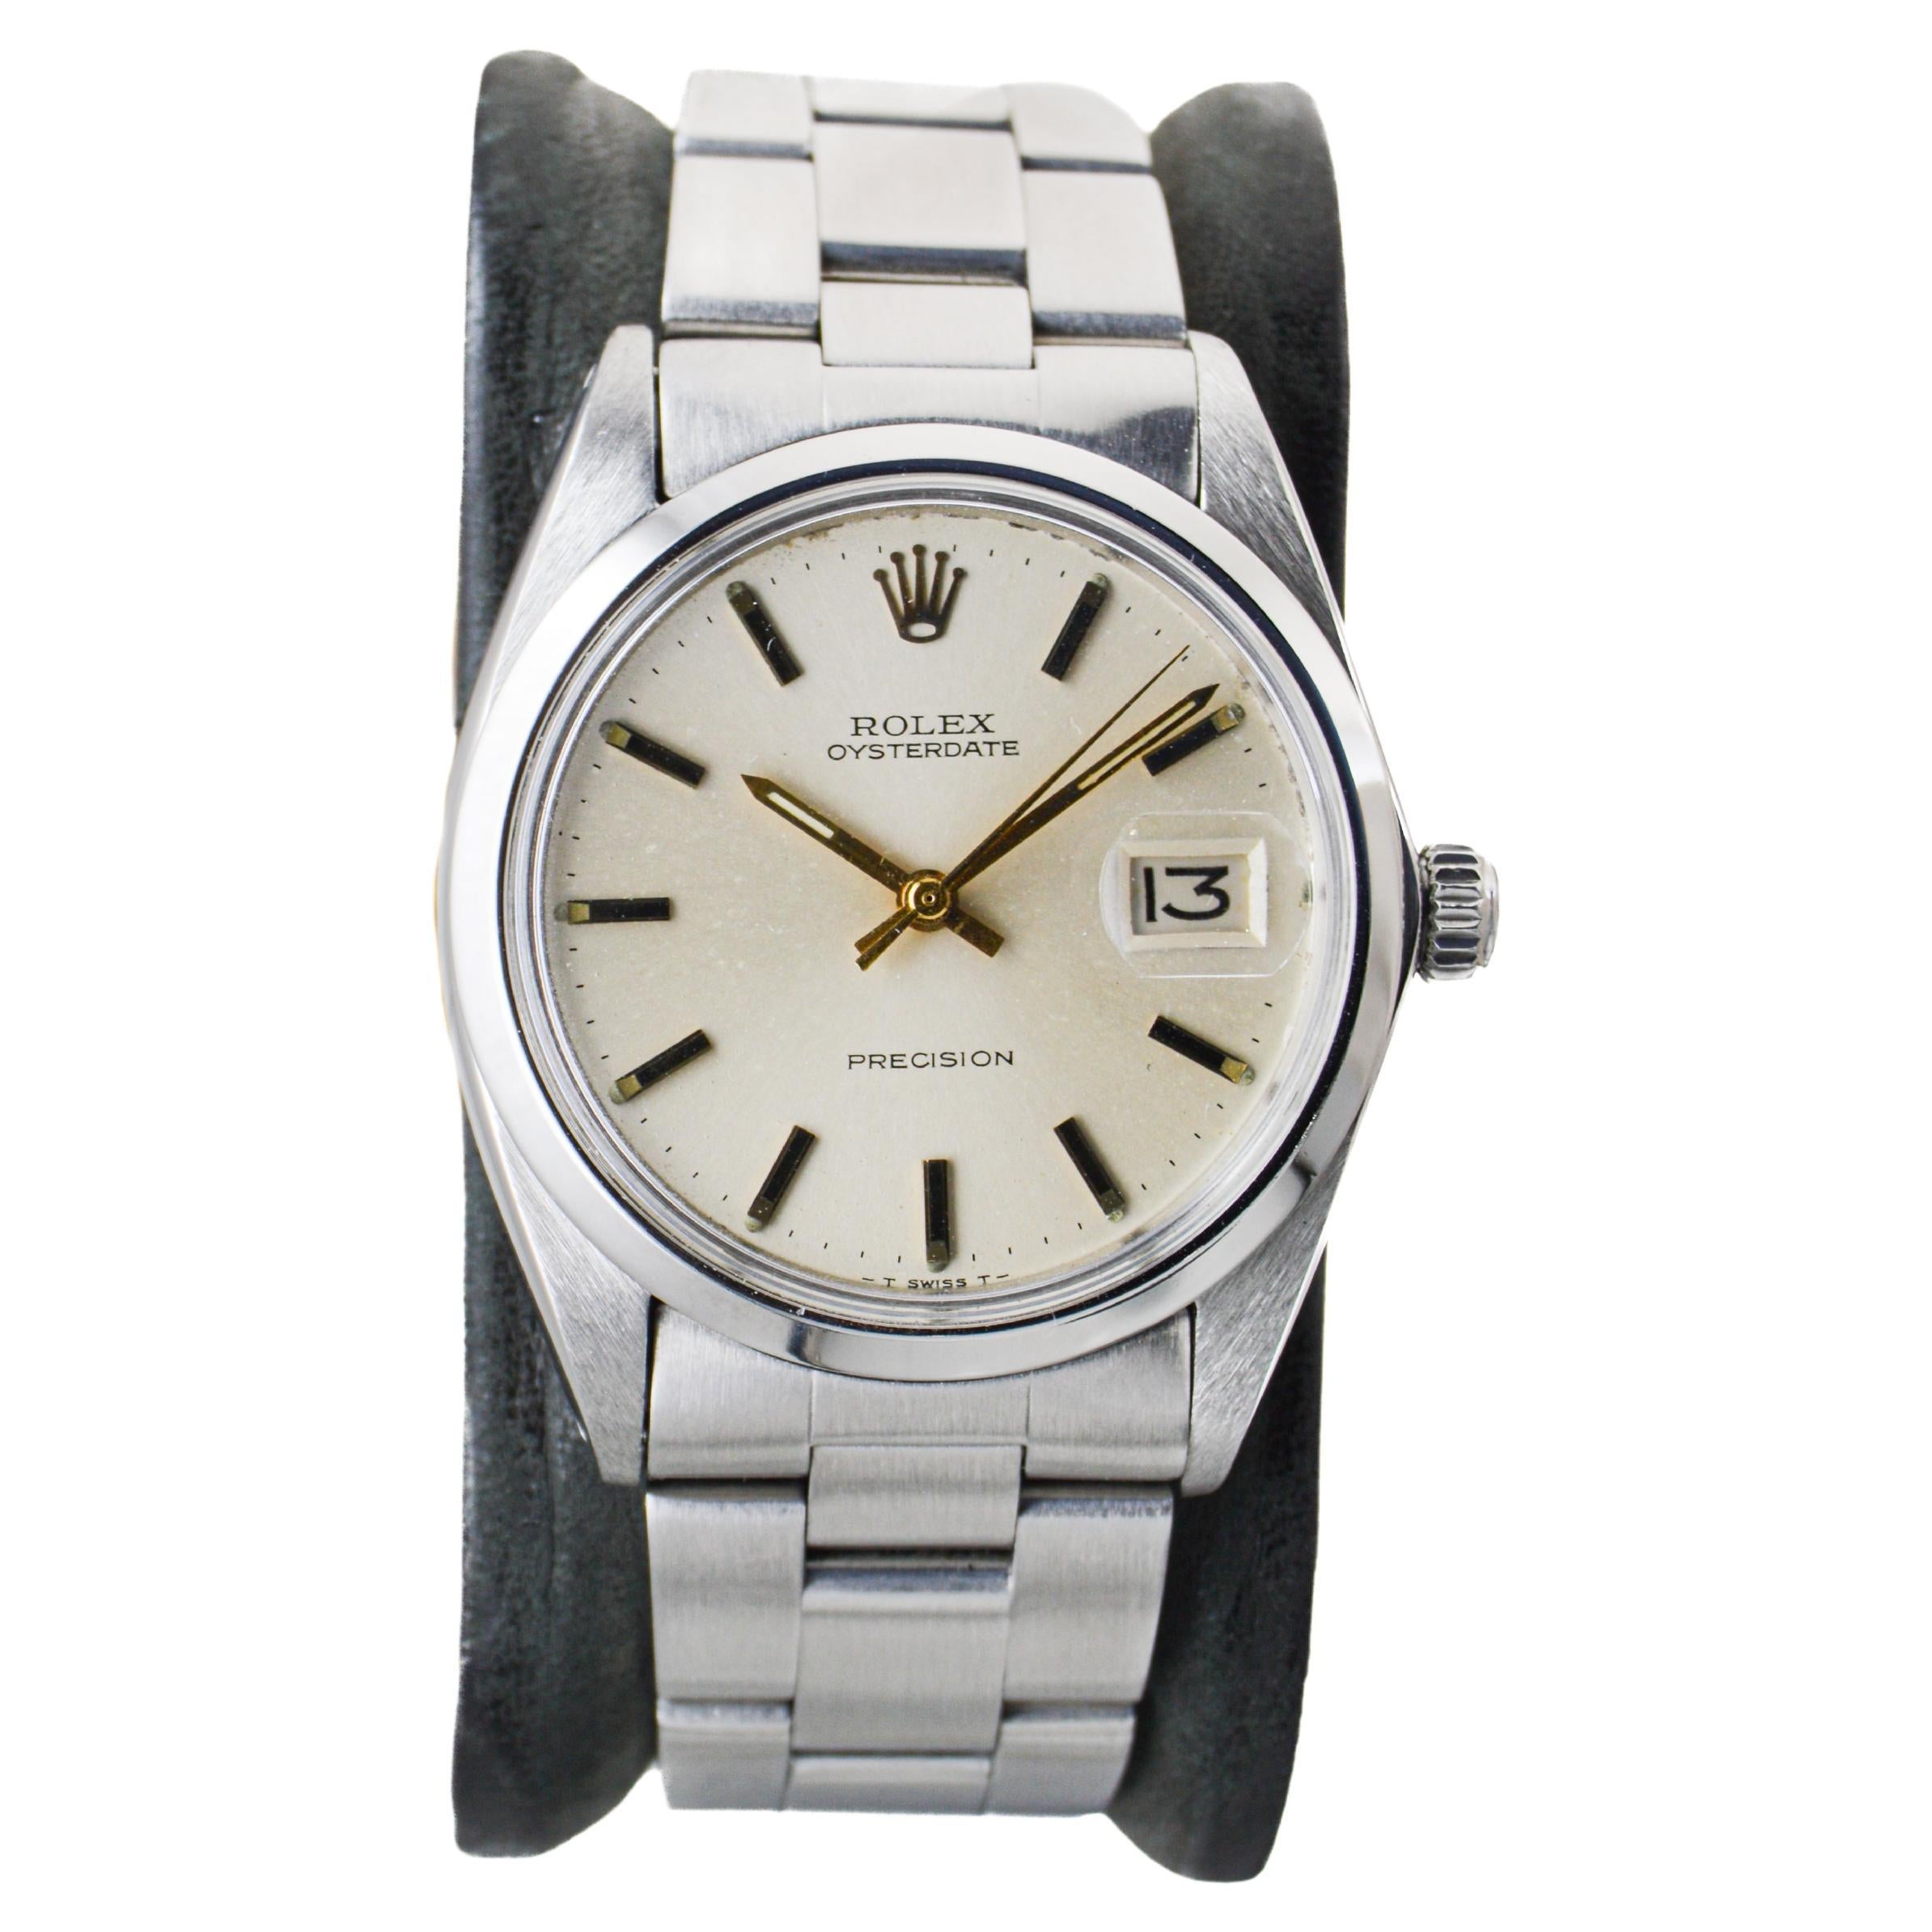 Rolex Stainless Steel Oysterdate with Factory Original Silver Dial circa, 1960's